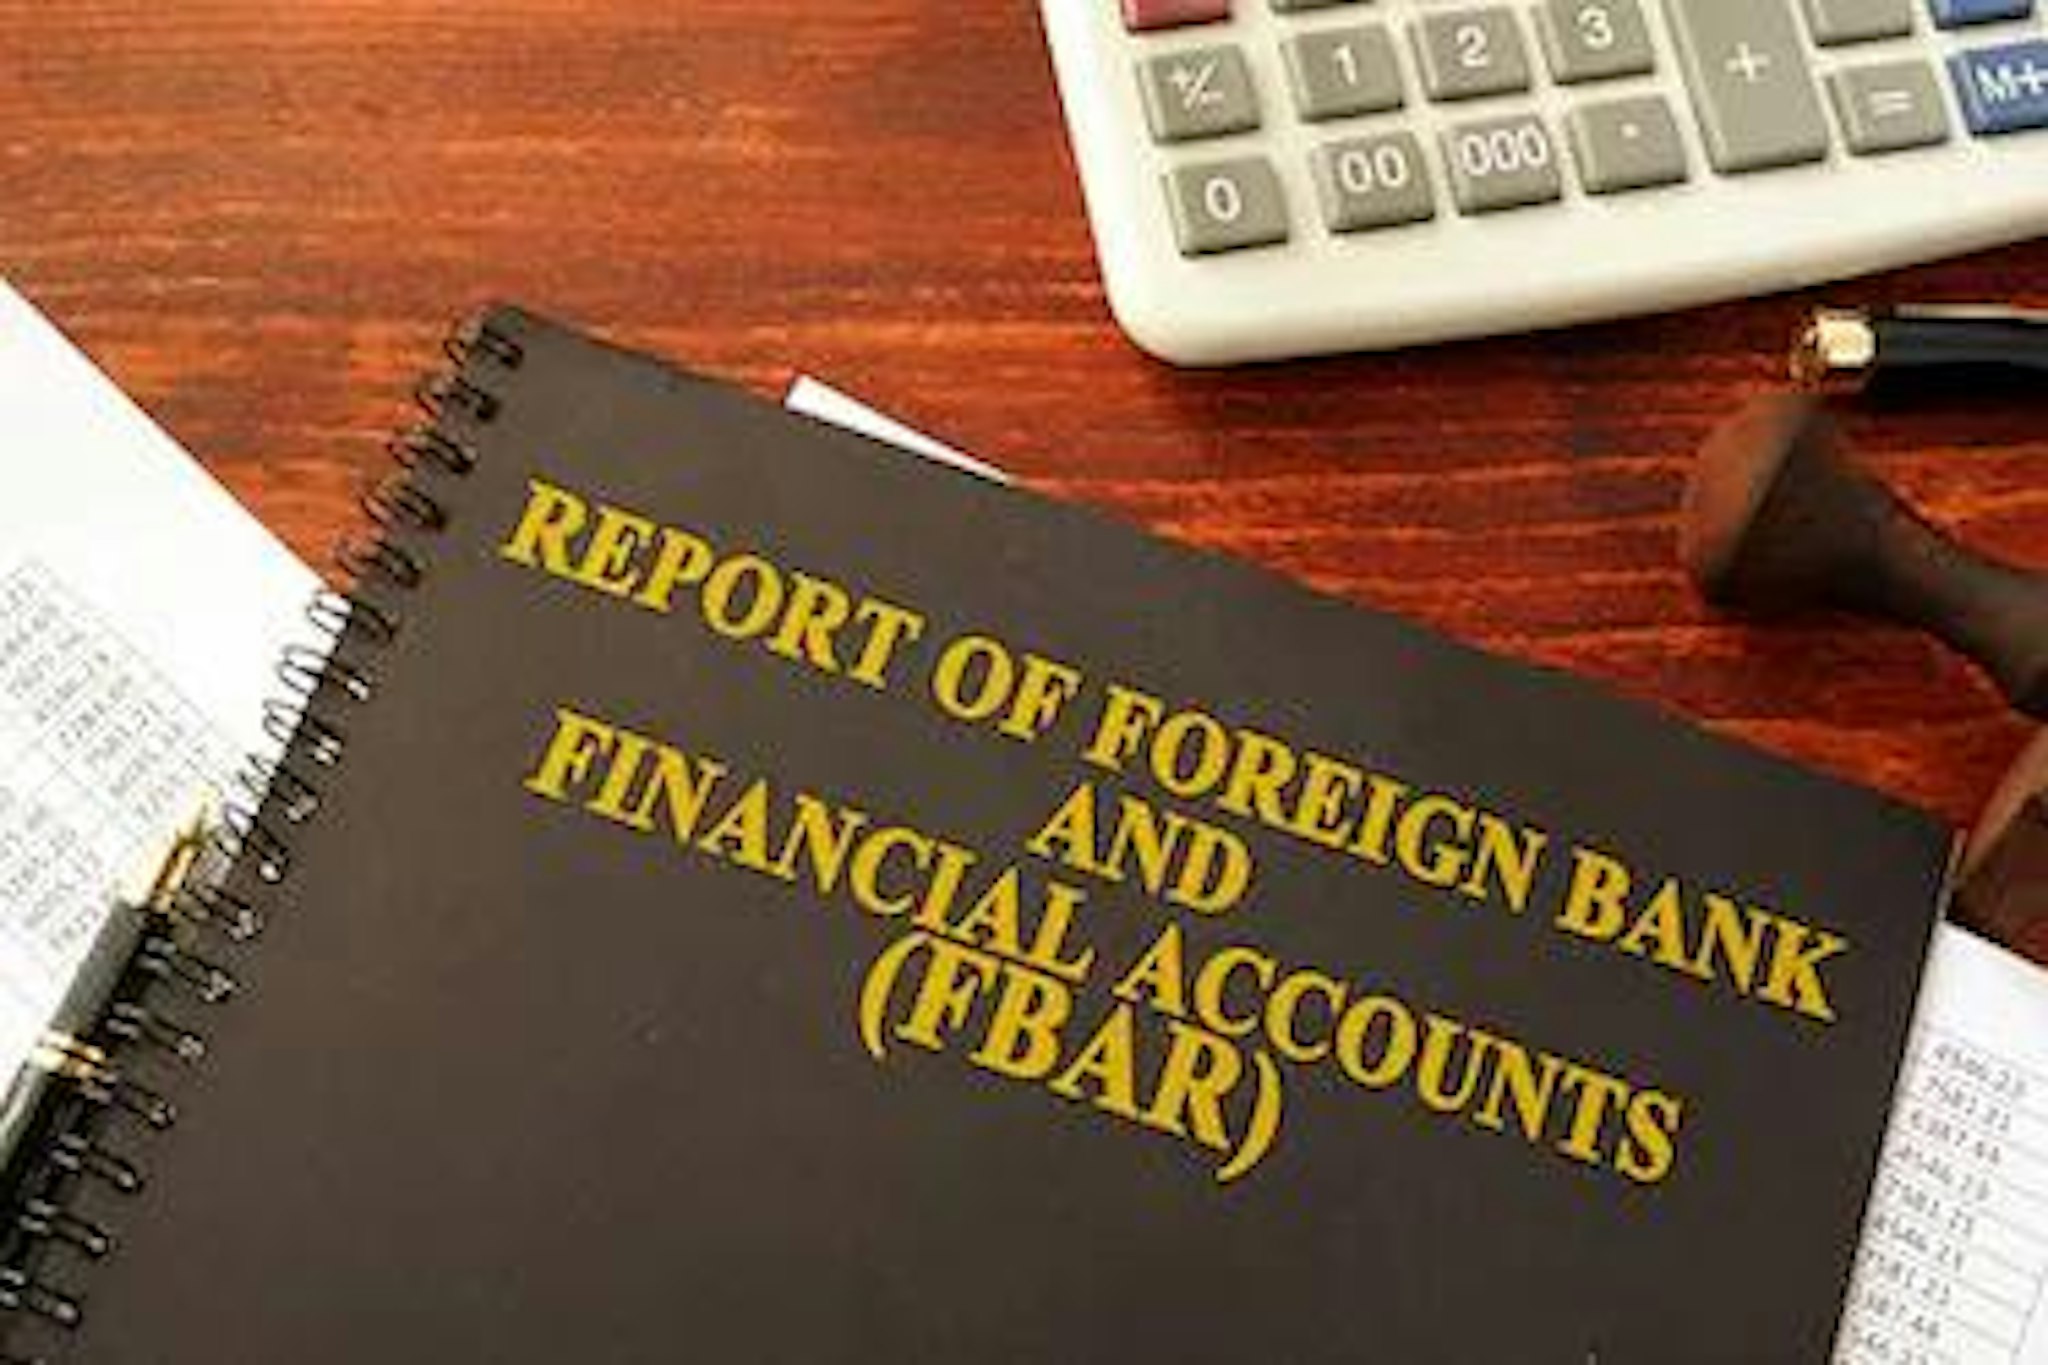 Printed report in binder reading "report of foreign bank and financial accounts (FBAR)"